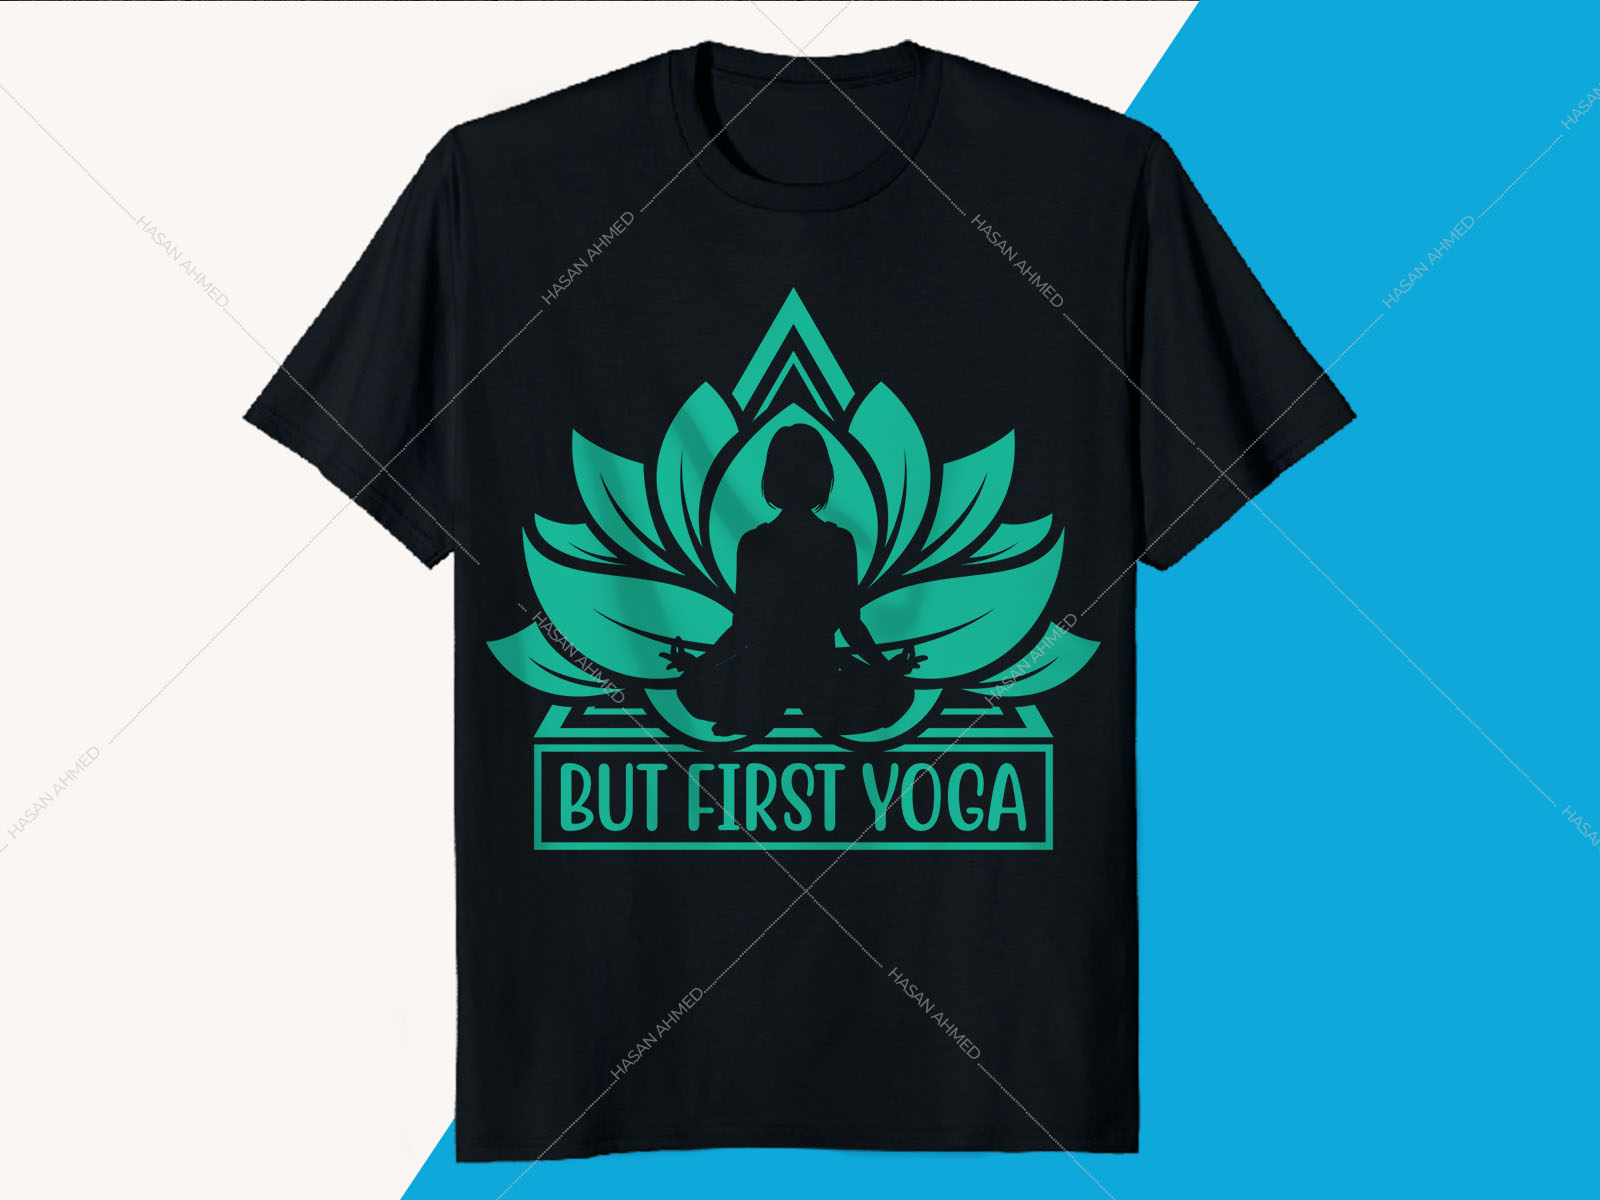 But First Yoga T-shirt Design Template by Hasan Ahmed on Dribbble